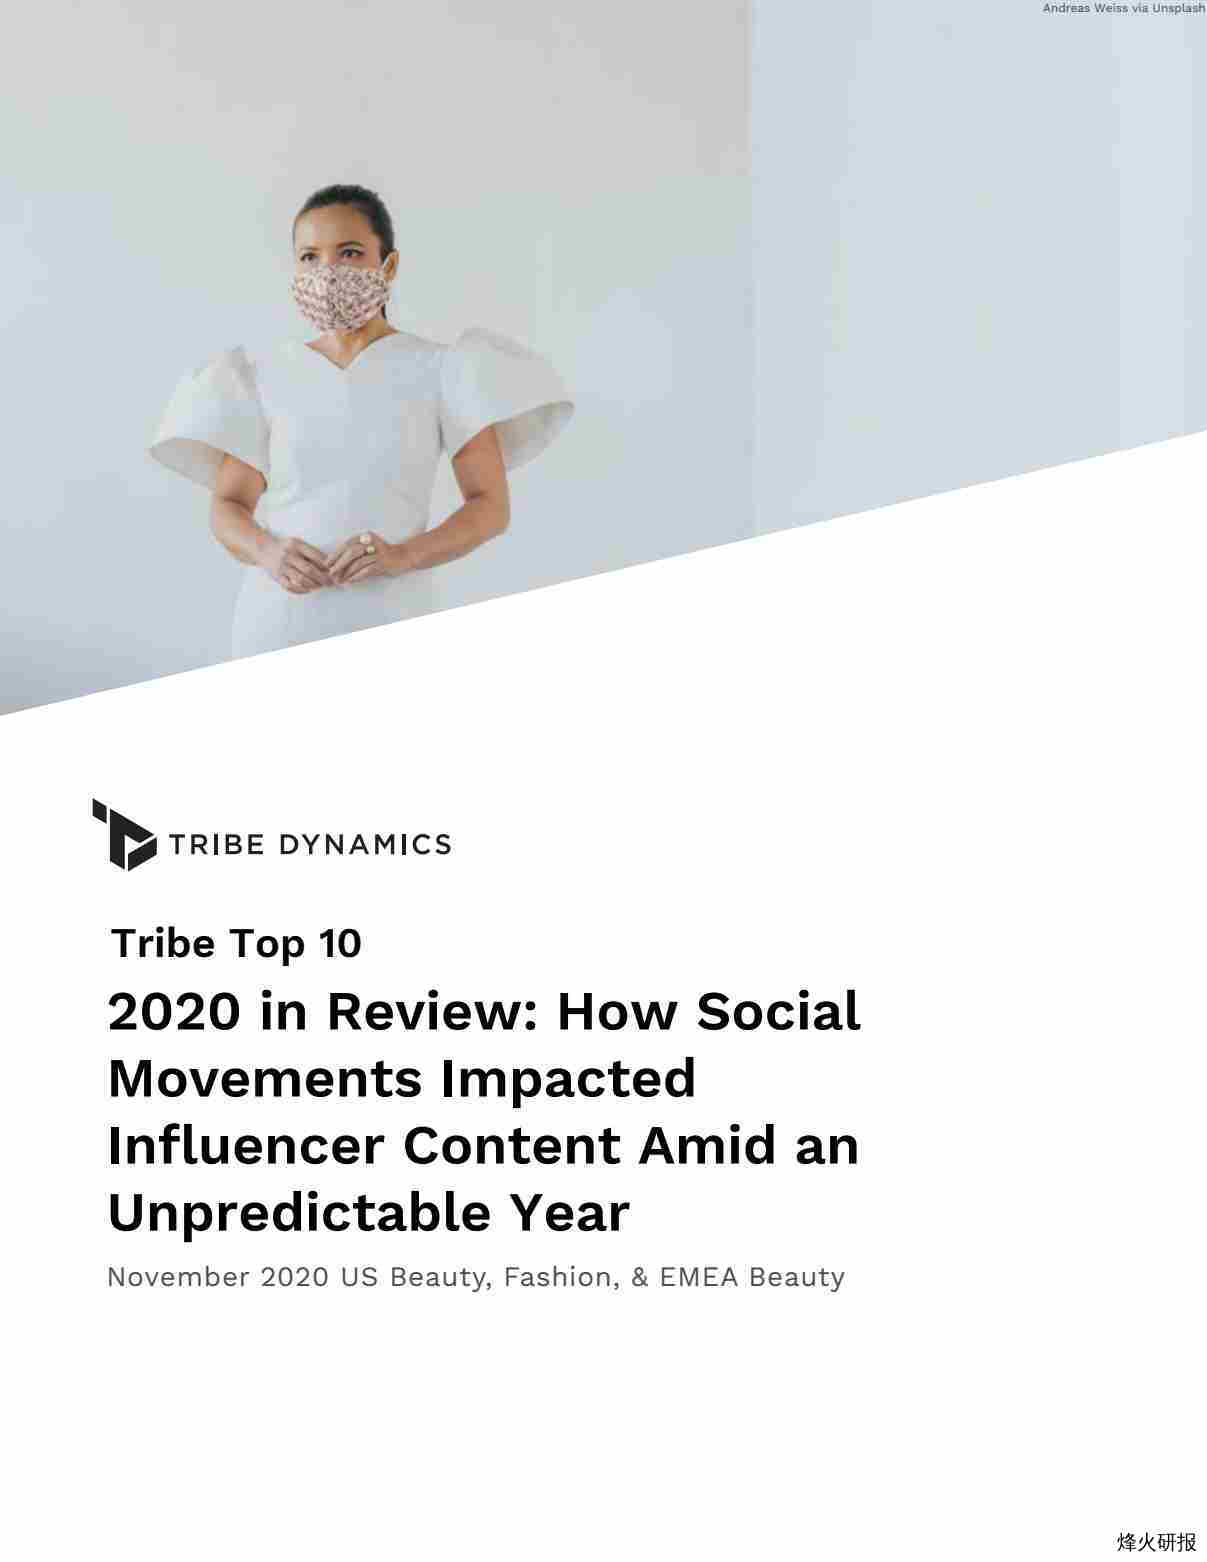 【Tribe Dynamics】November Beauty and Fashion Rankings: How Social Movements Impacted Influencer Content Amid an Unpredictable Year.pdf-第一页